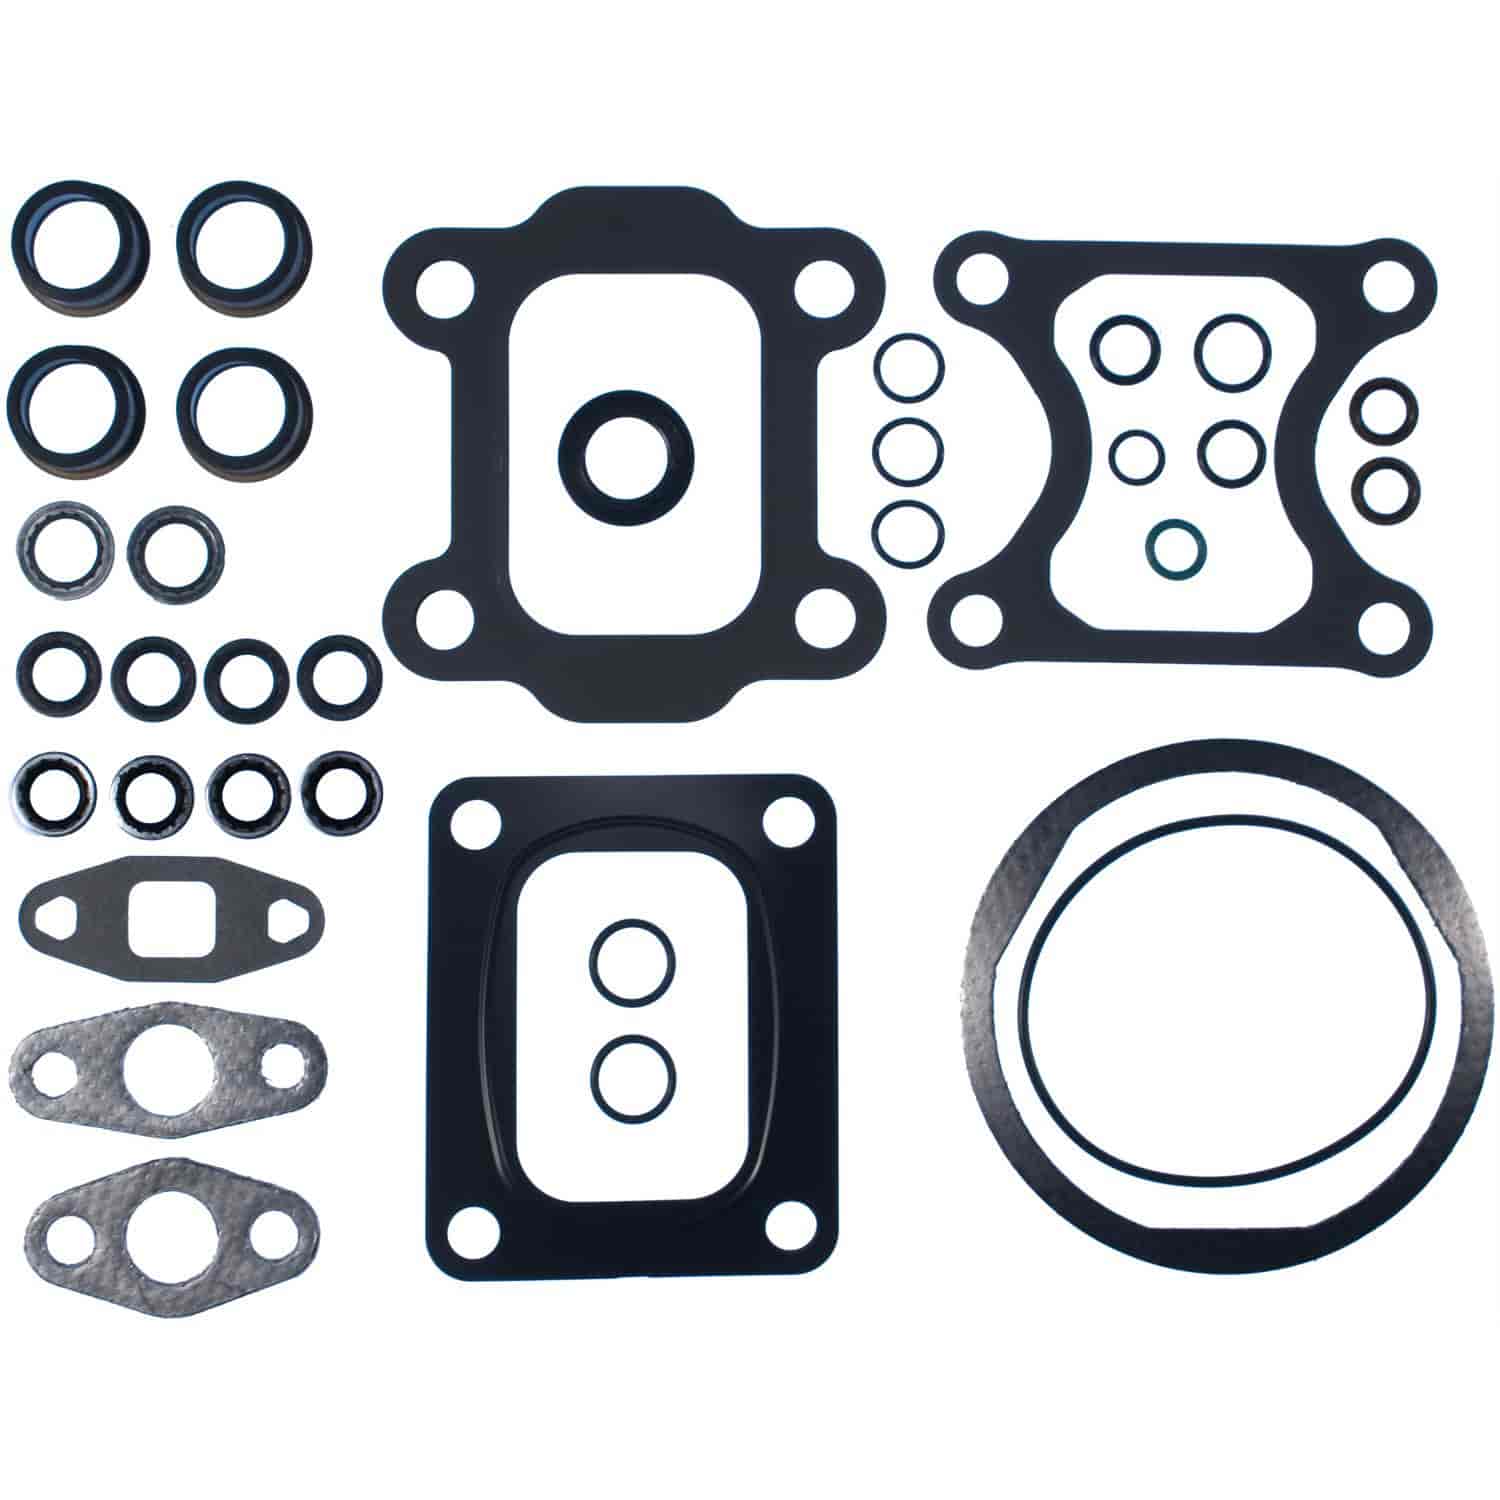 Turbocharger Mounting Set for Cummins ISX Engines. Turbocharger Mounting Gasket Set